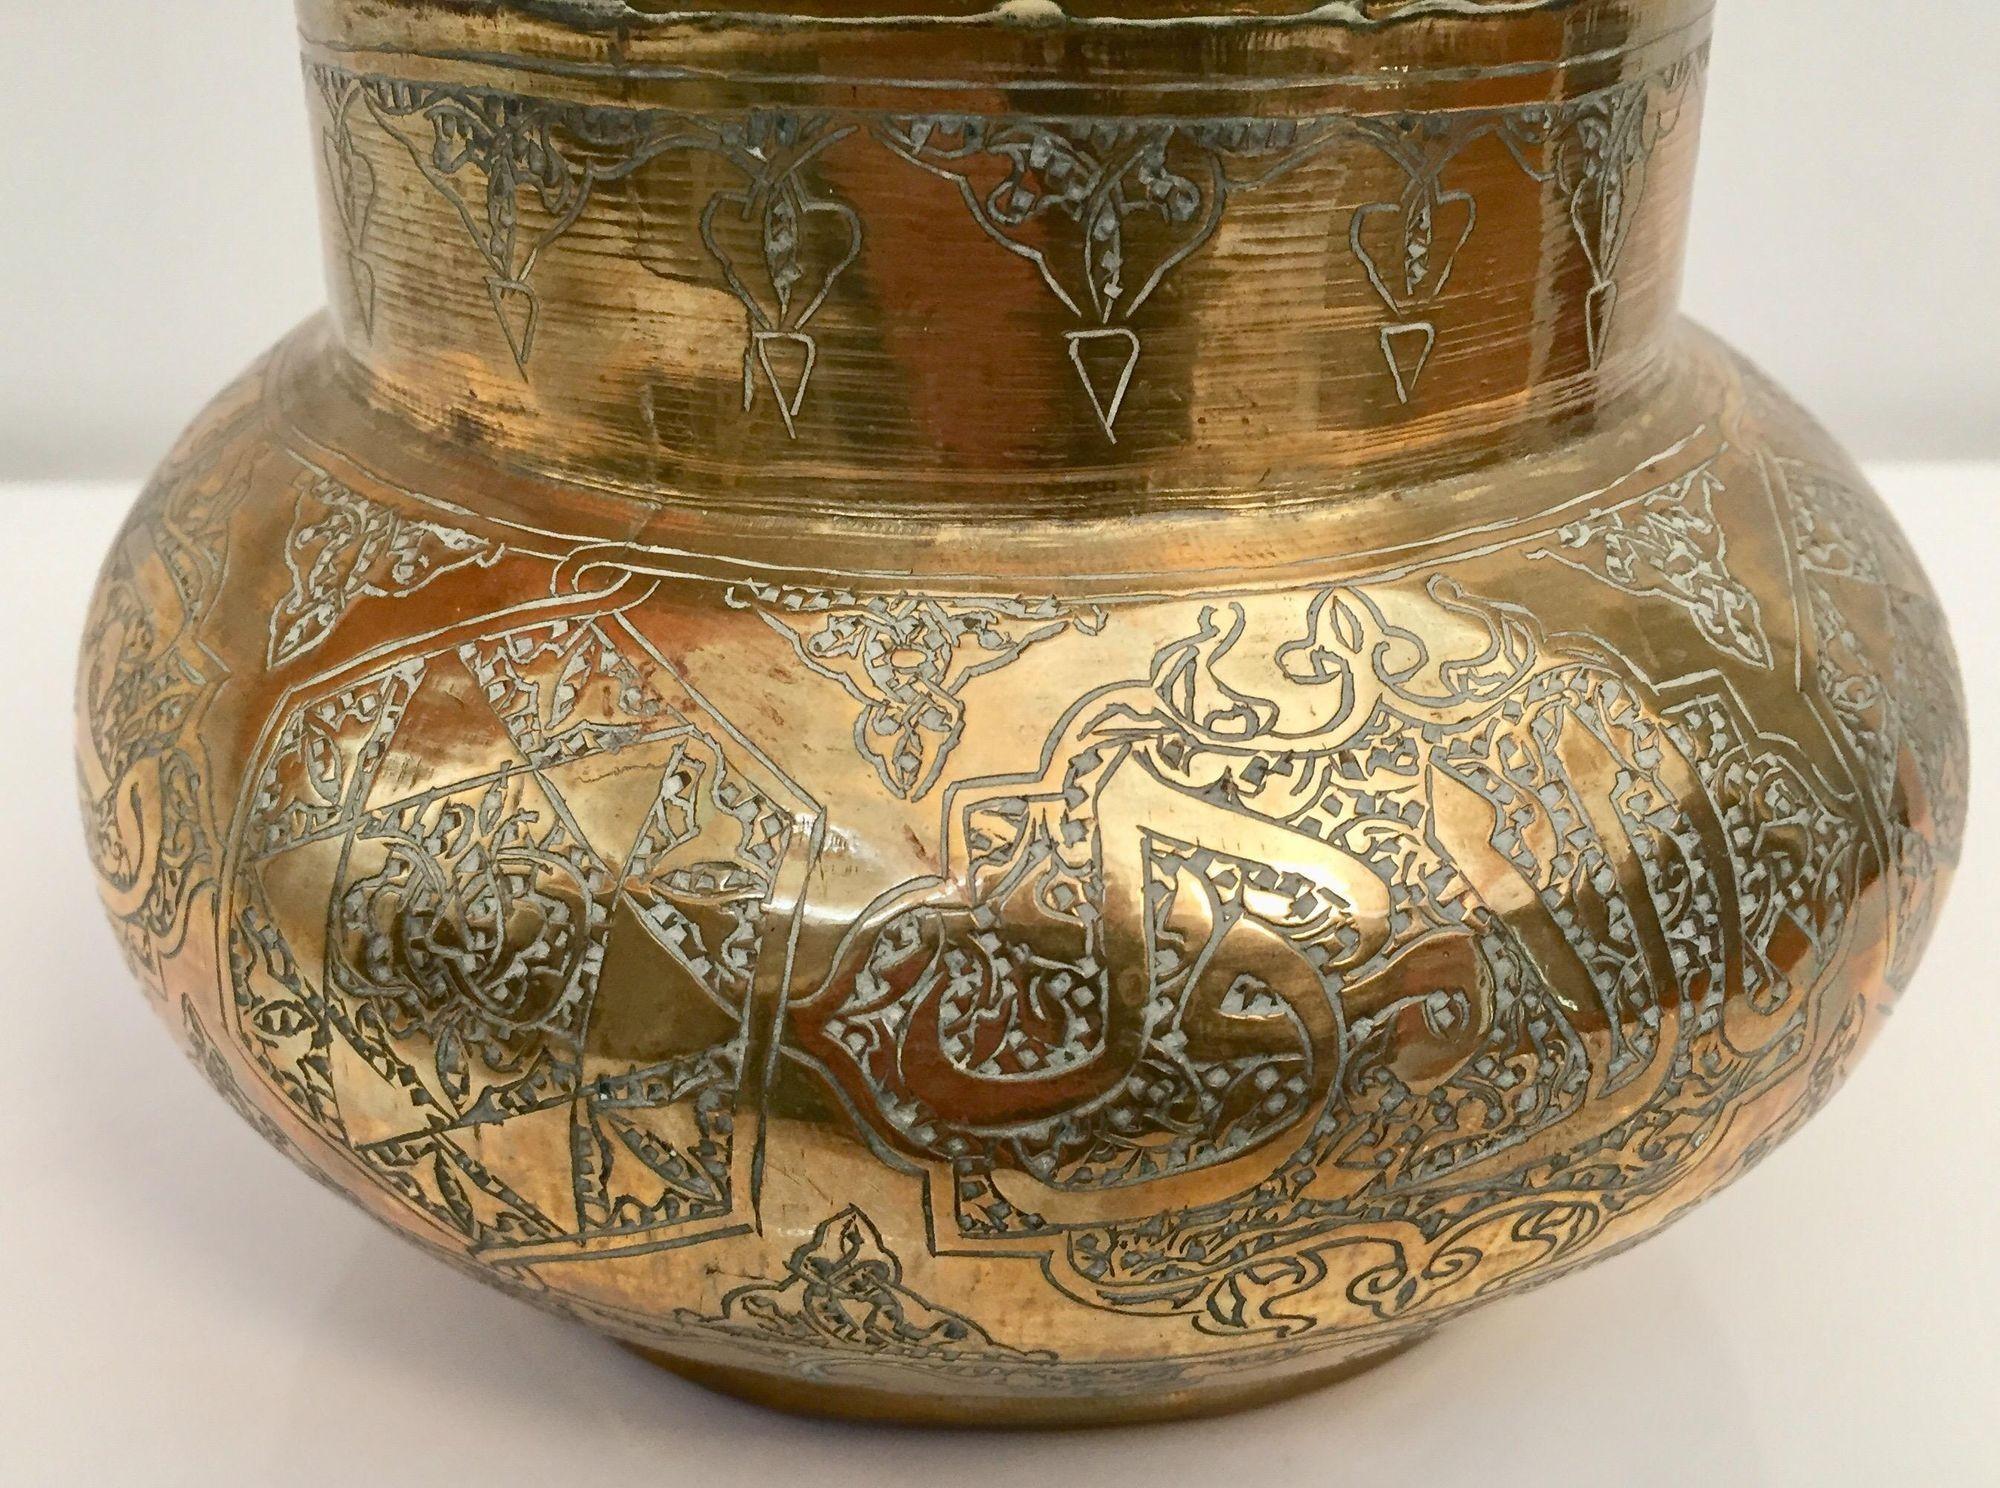 Middle Eastern Hand-Etched Islamic Brass Vase with Calligraphy Writing For Sale 1